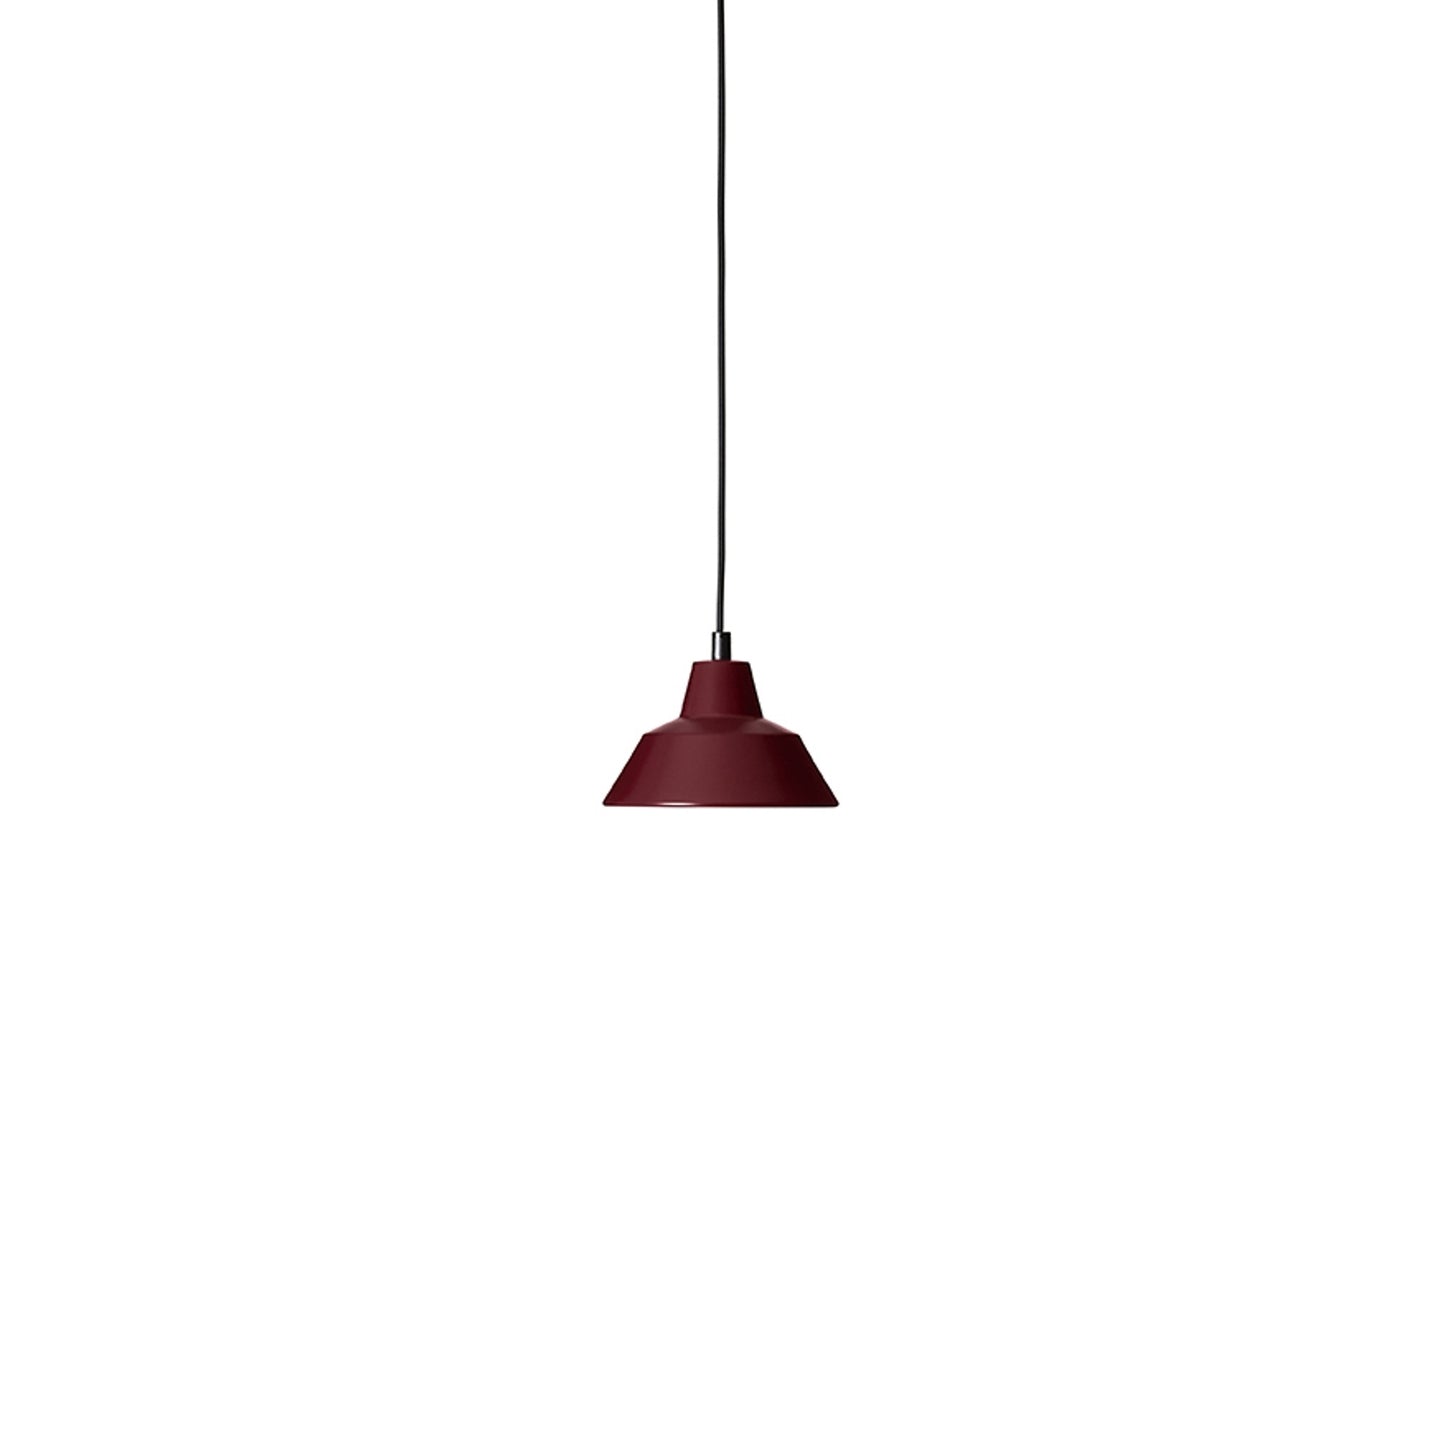 Workshop Lamp Pendant Lamp W1 by Made By Hand #Wine Red